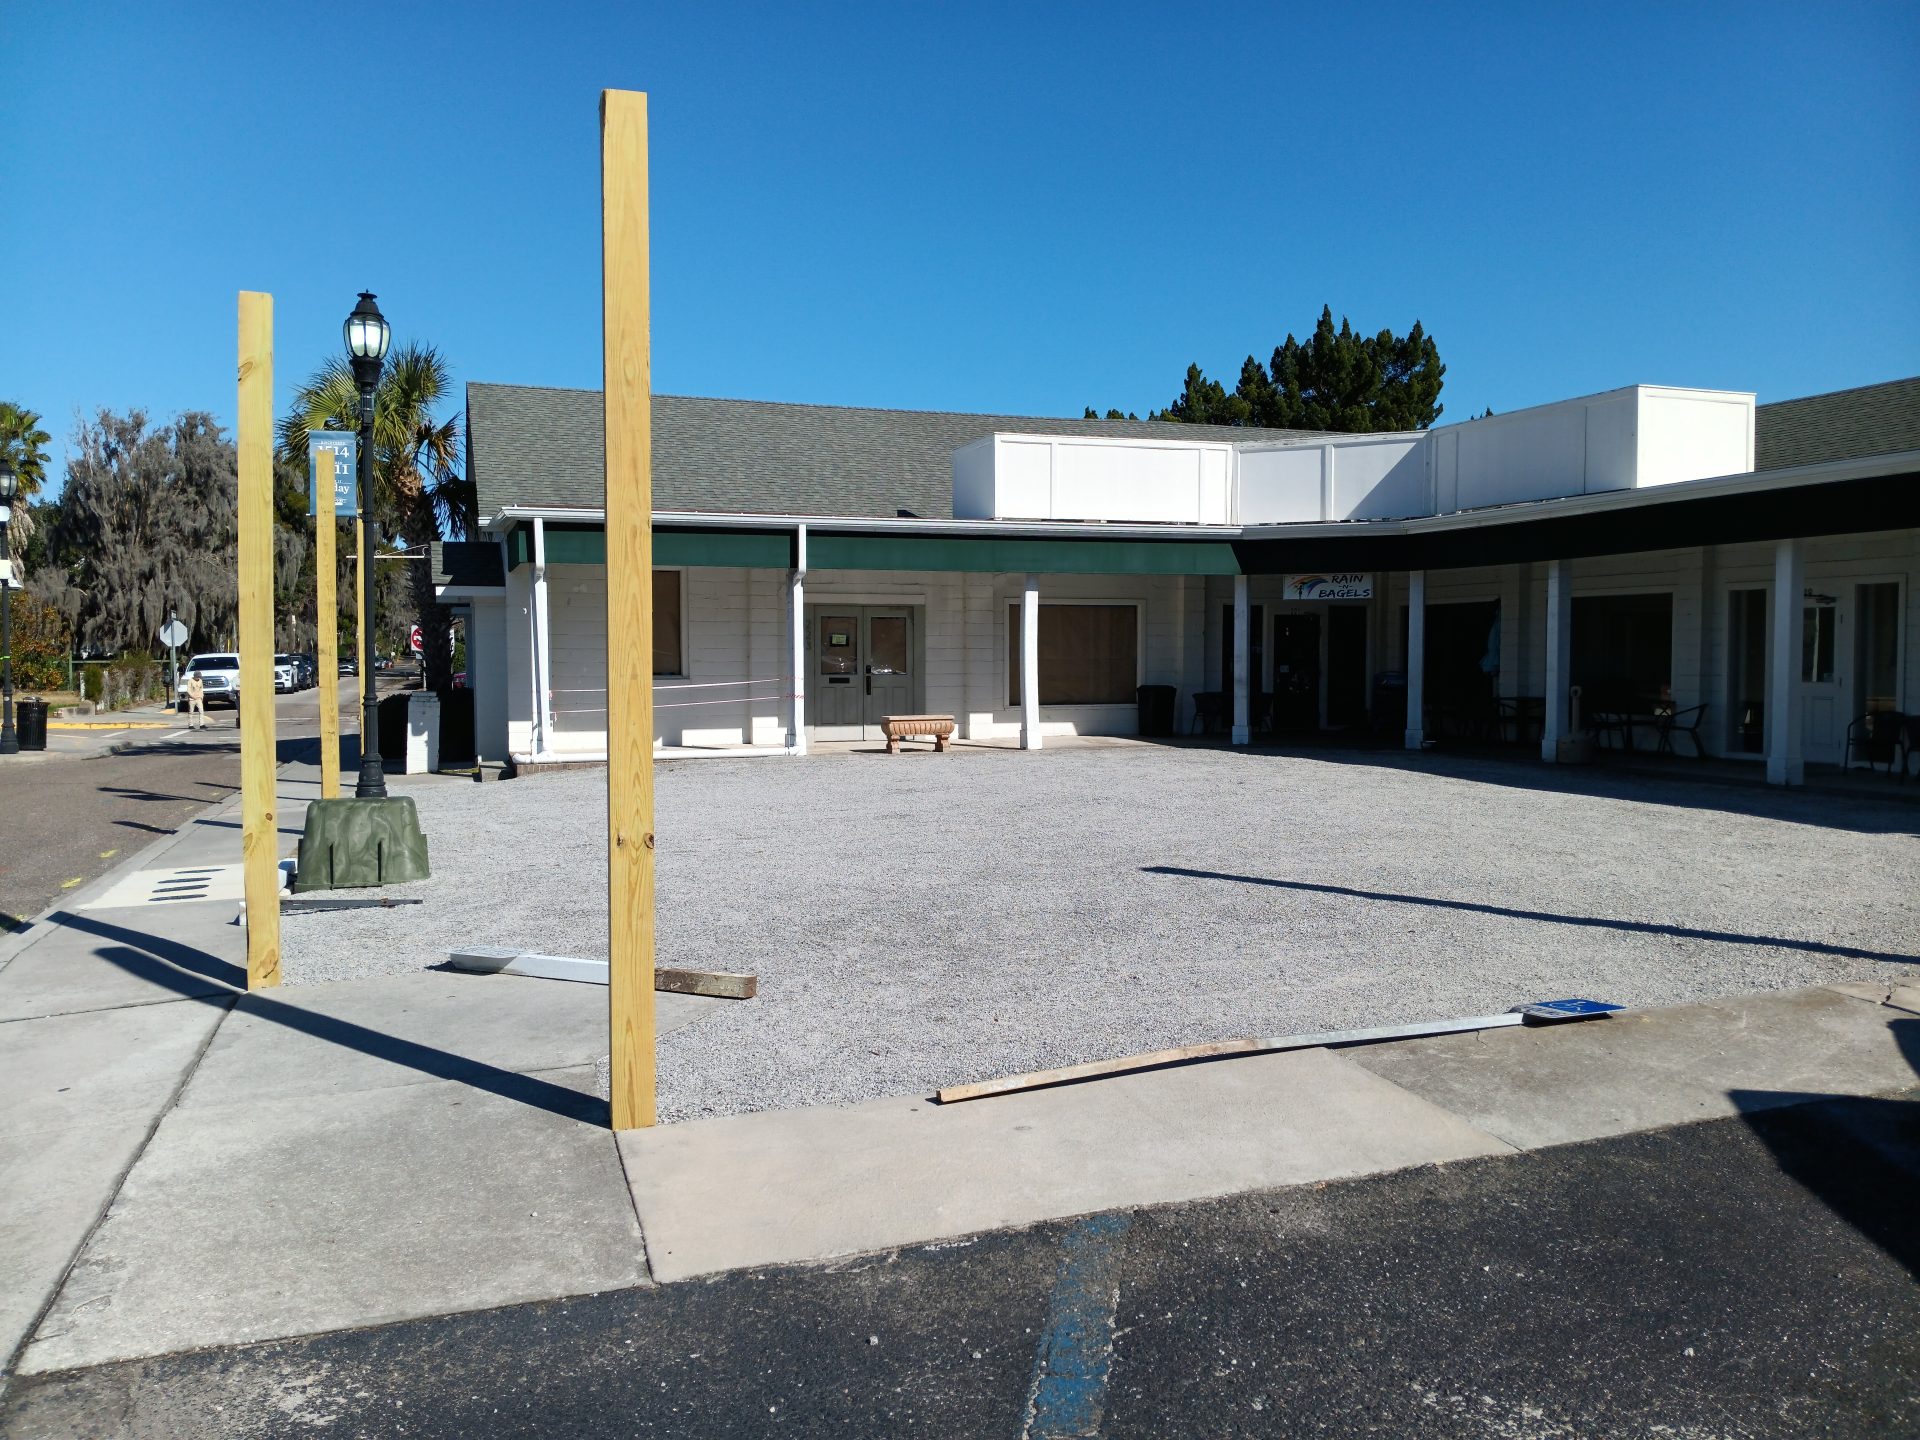 Trees and grass were cleared, gravel was spread and posts were erected in front of 223 Scott Street in downtown Beaufort. The building is being repurposed for a gourmet hot dog restaurant and beer garden called HopDog, which should open sometime this spring. Mike McCombs/The Island News